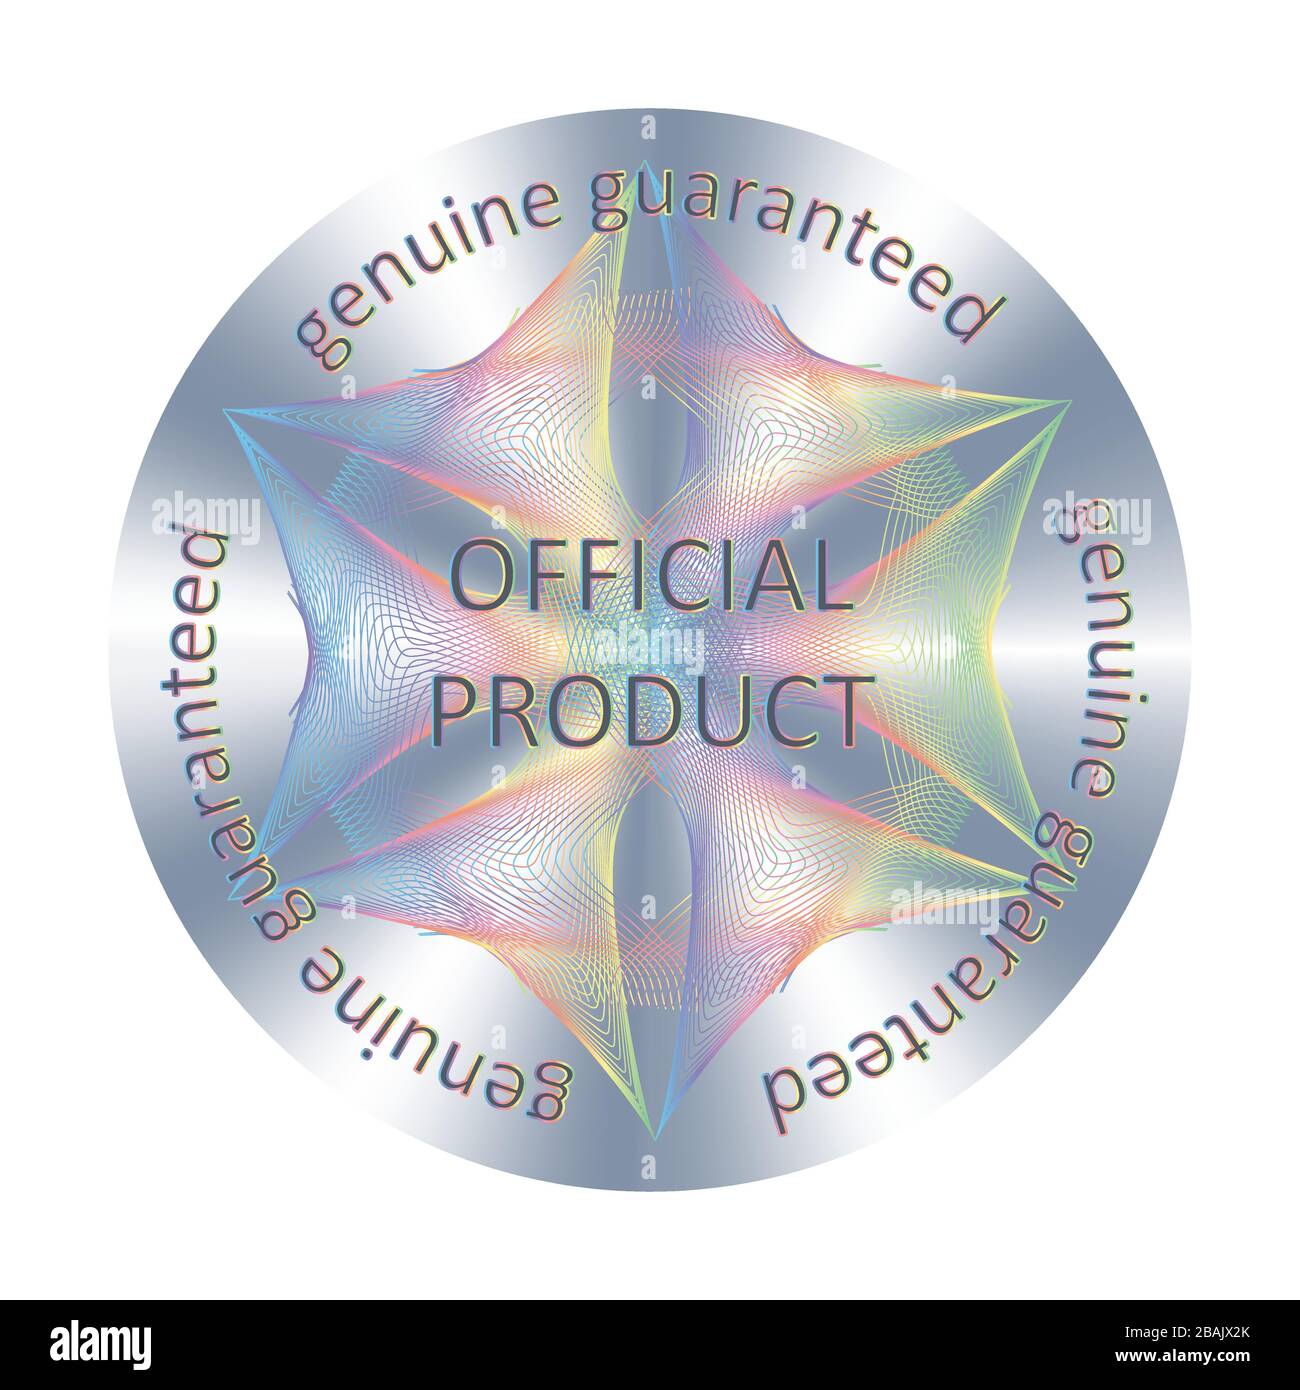 Official product round hologram sticker. Stock Vector